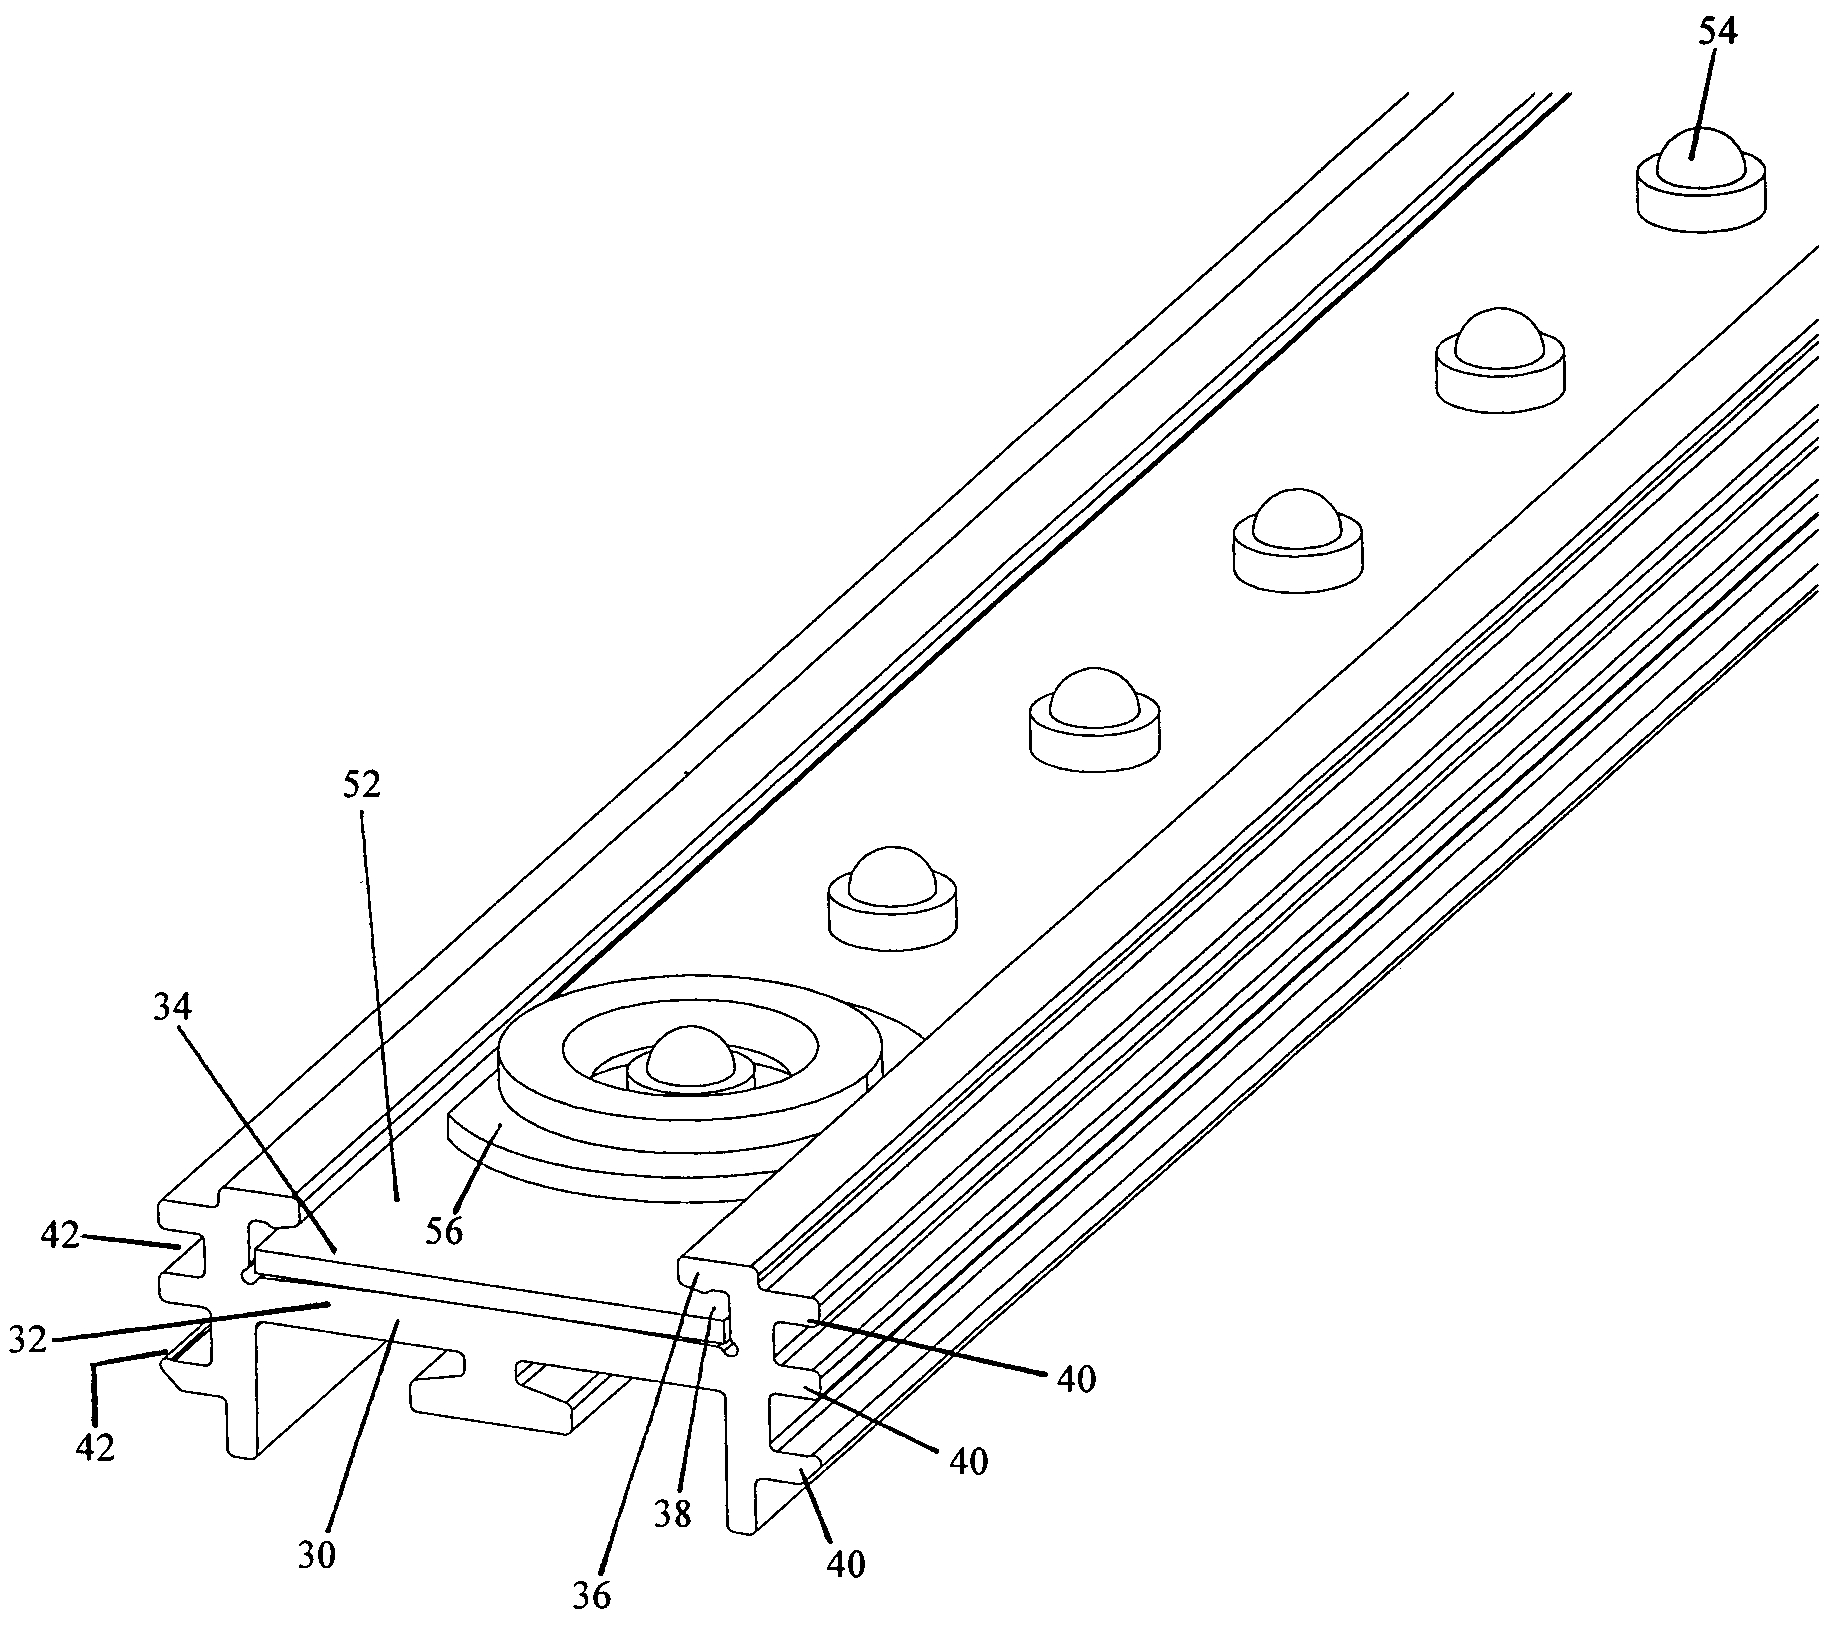 Method and apparatus for irradiation of plants using light emitting diodes